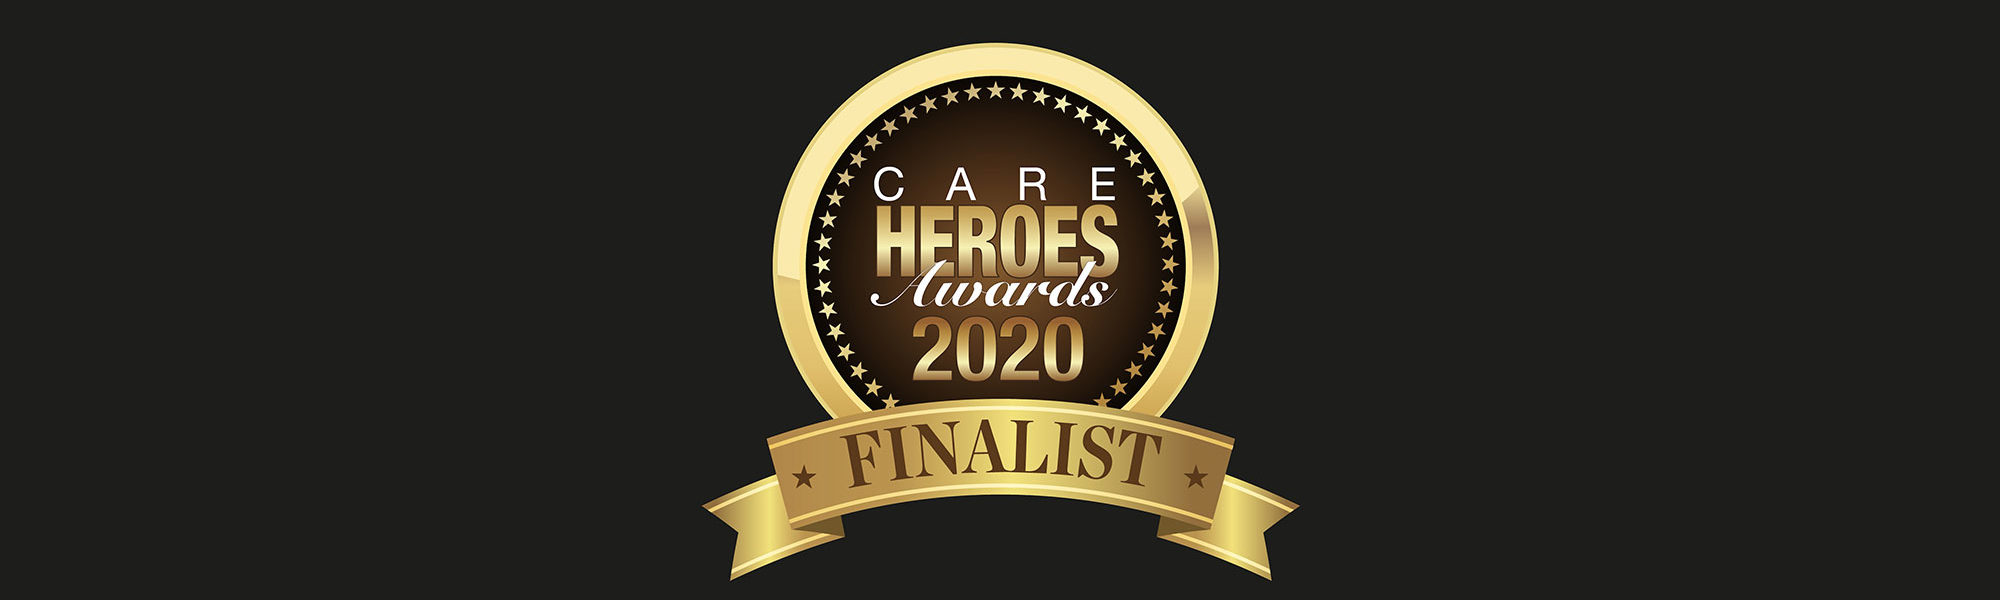 Care-Heroes-Awards-2020-Web-Banner